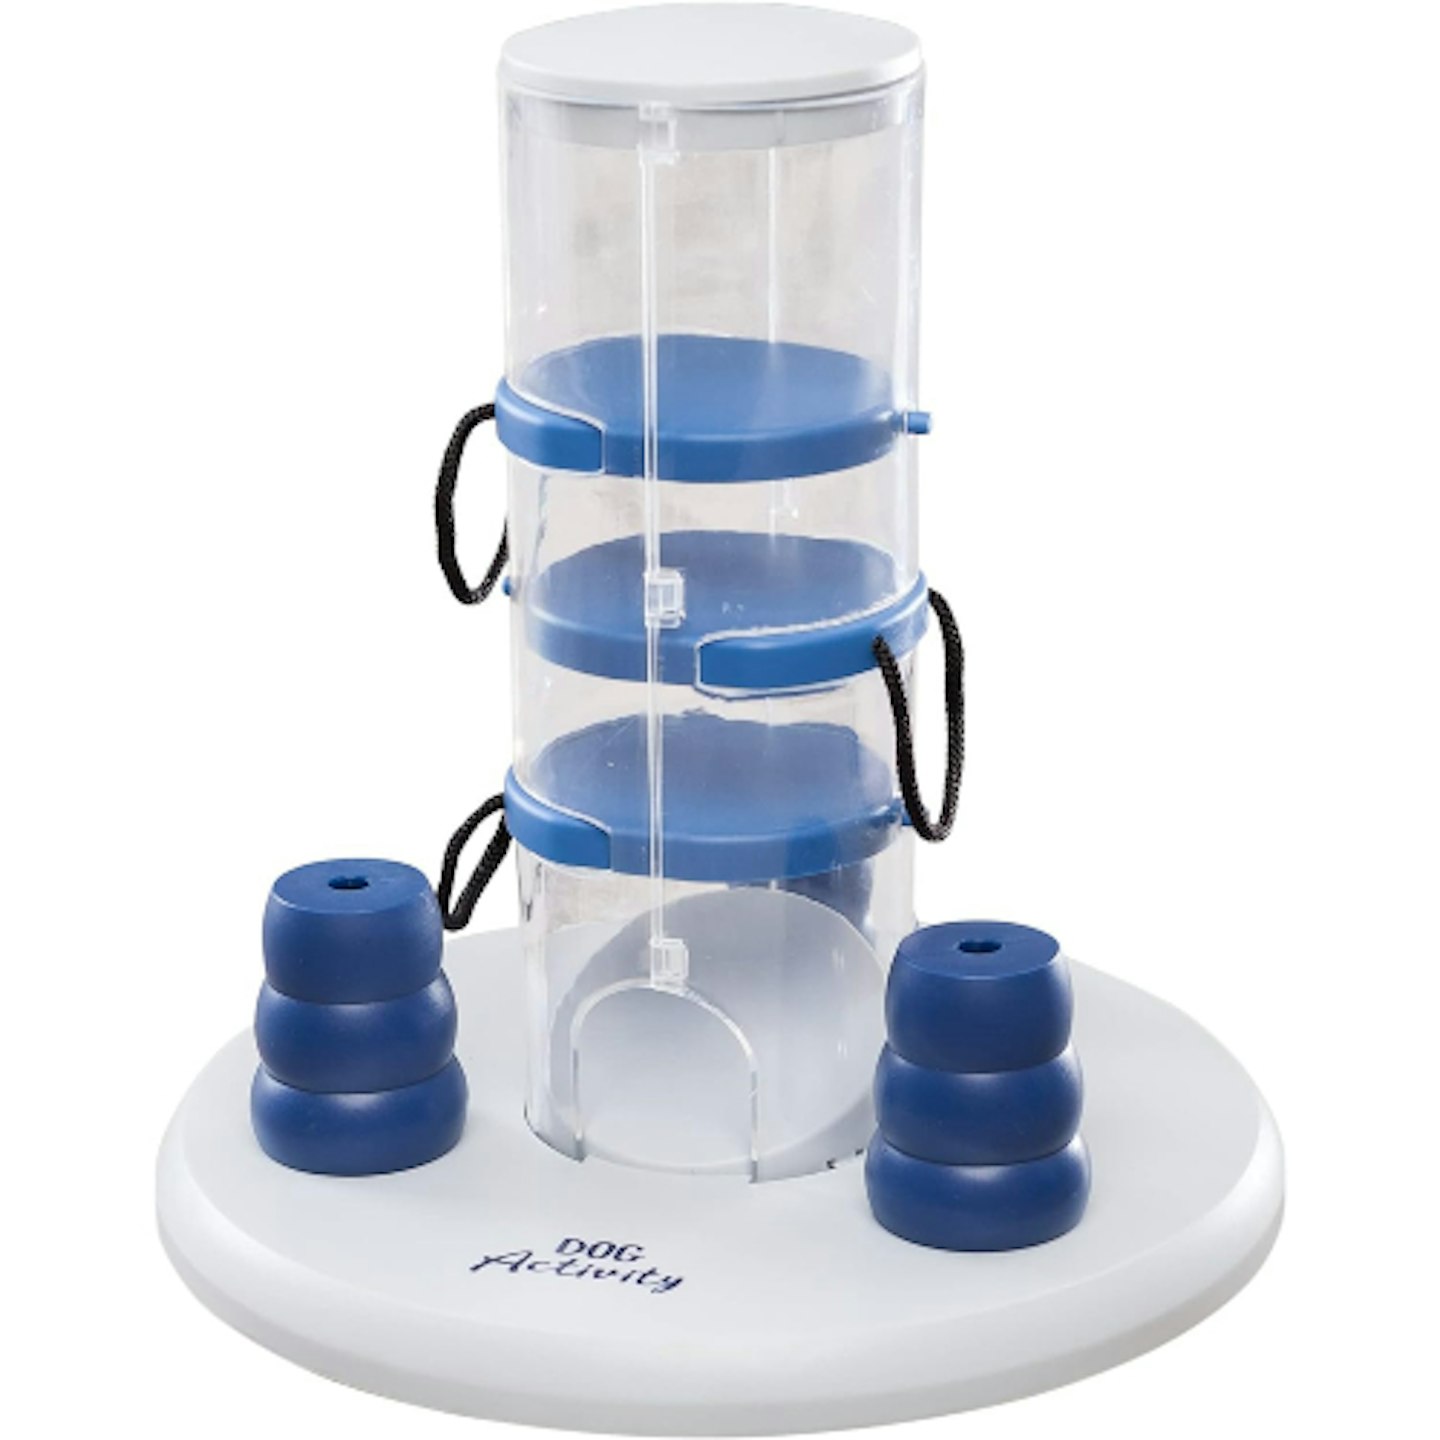 Trixie Dog activity tower